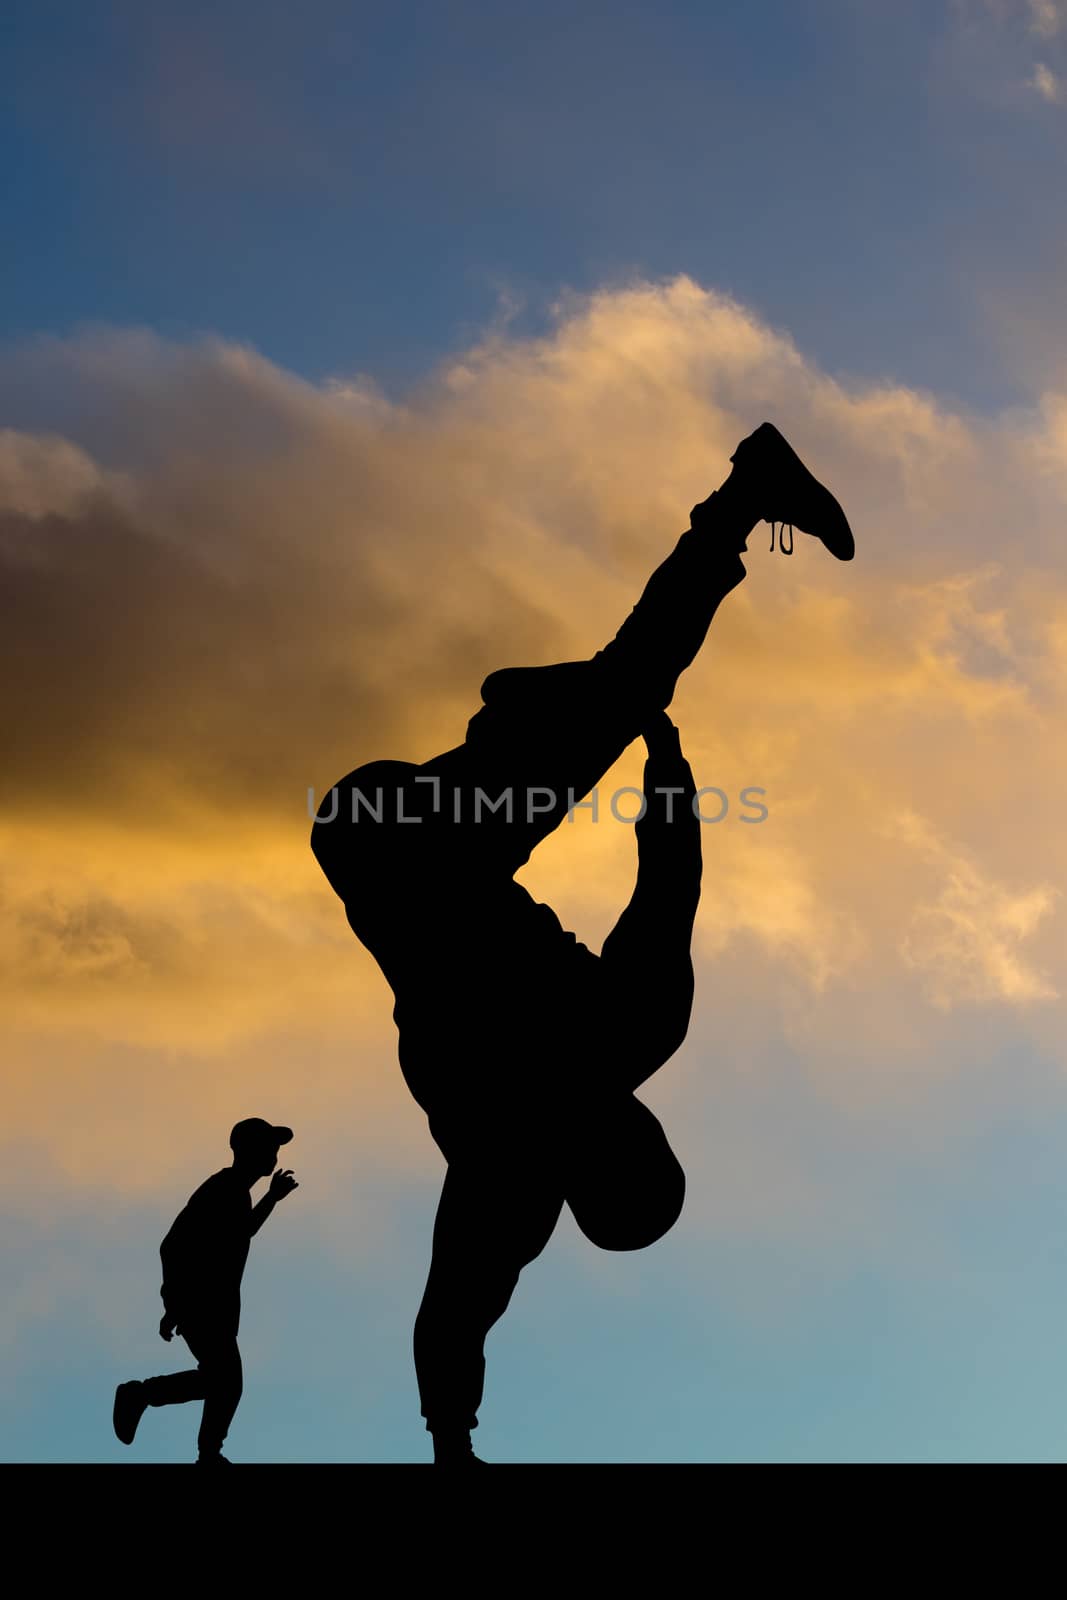 breakdance performer at sunset by adrenalina